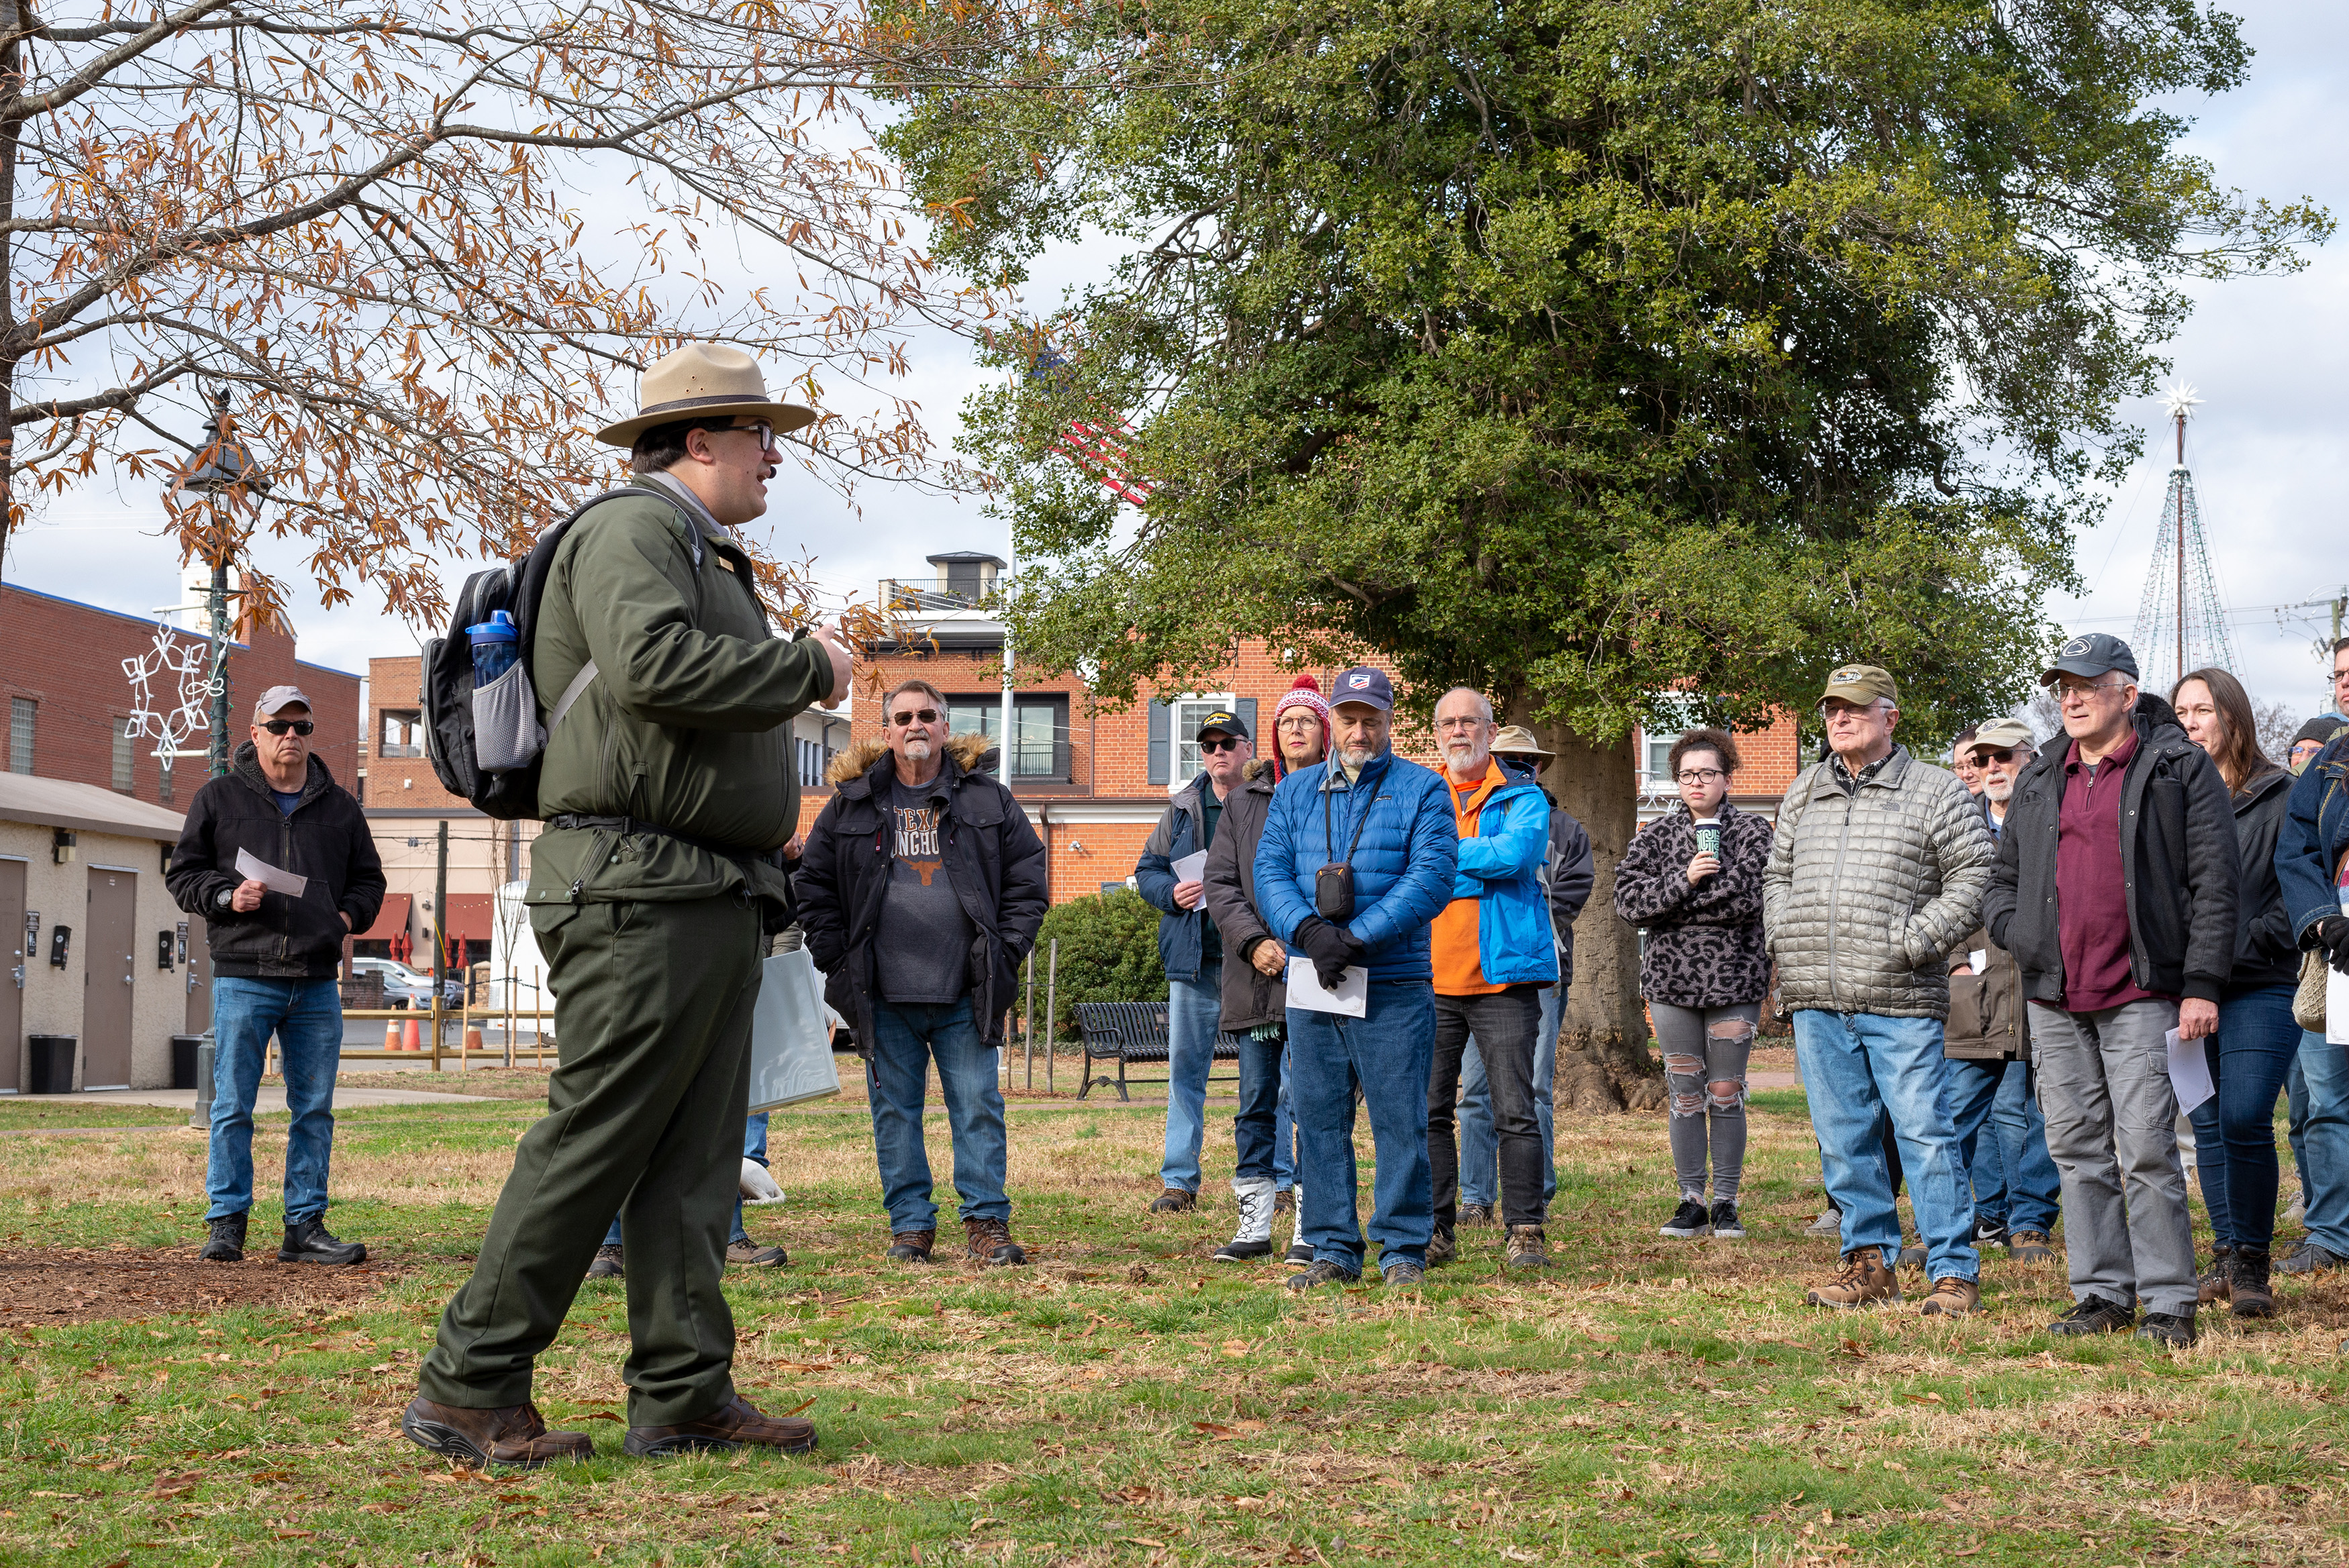 A male park ranger speak on the lawn of a city park to 20 people.